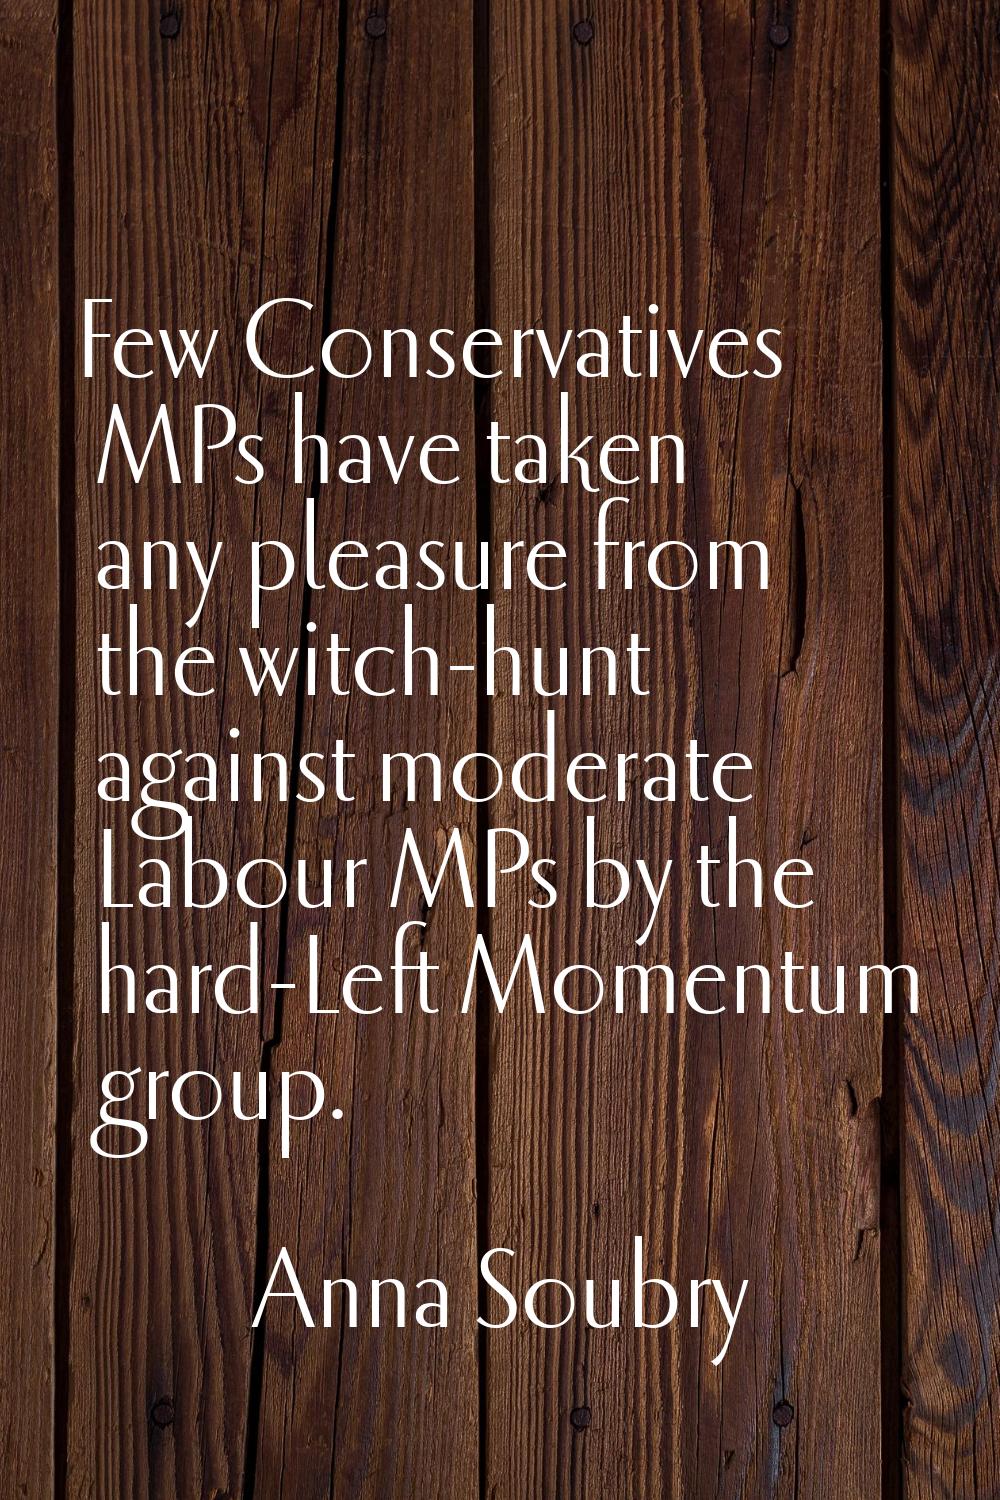 Few Conservatives MPs have taken any pleasure from the witch-hunt against moderate Labour MPs by th